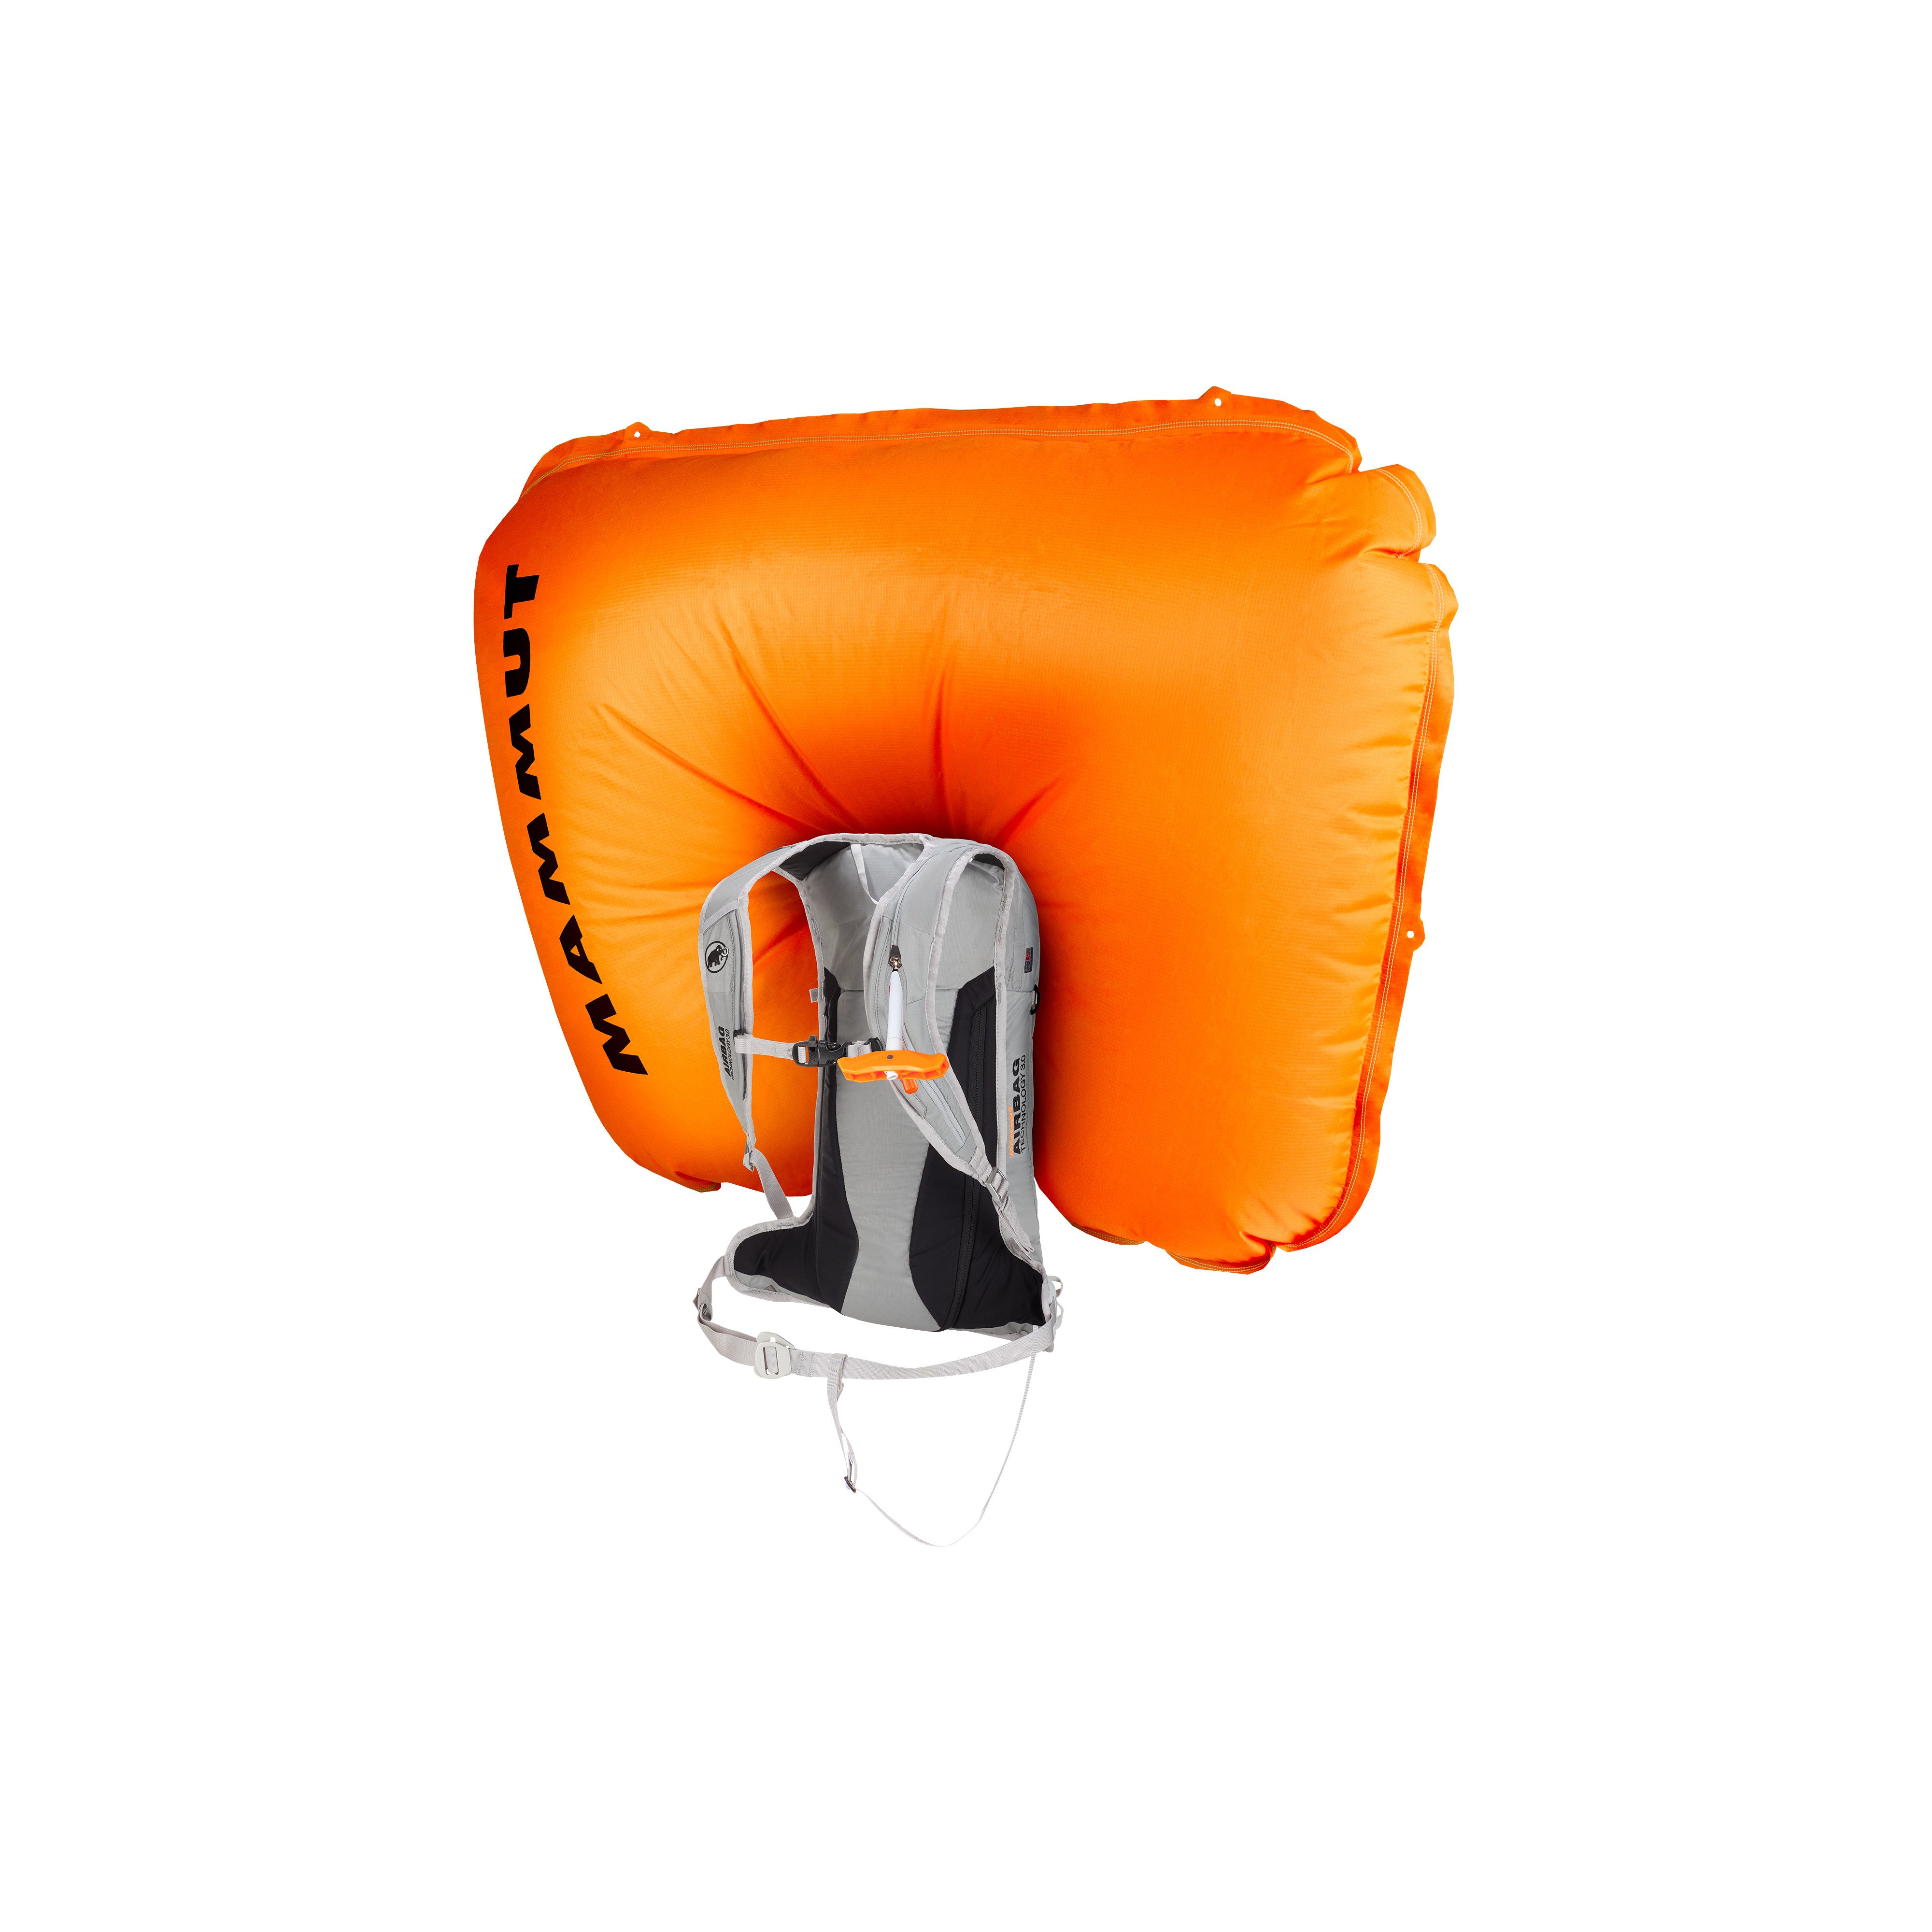 Ultralight Removable Airbag 3.0 - highway, 20 L product image